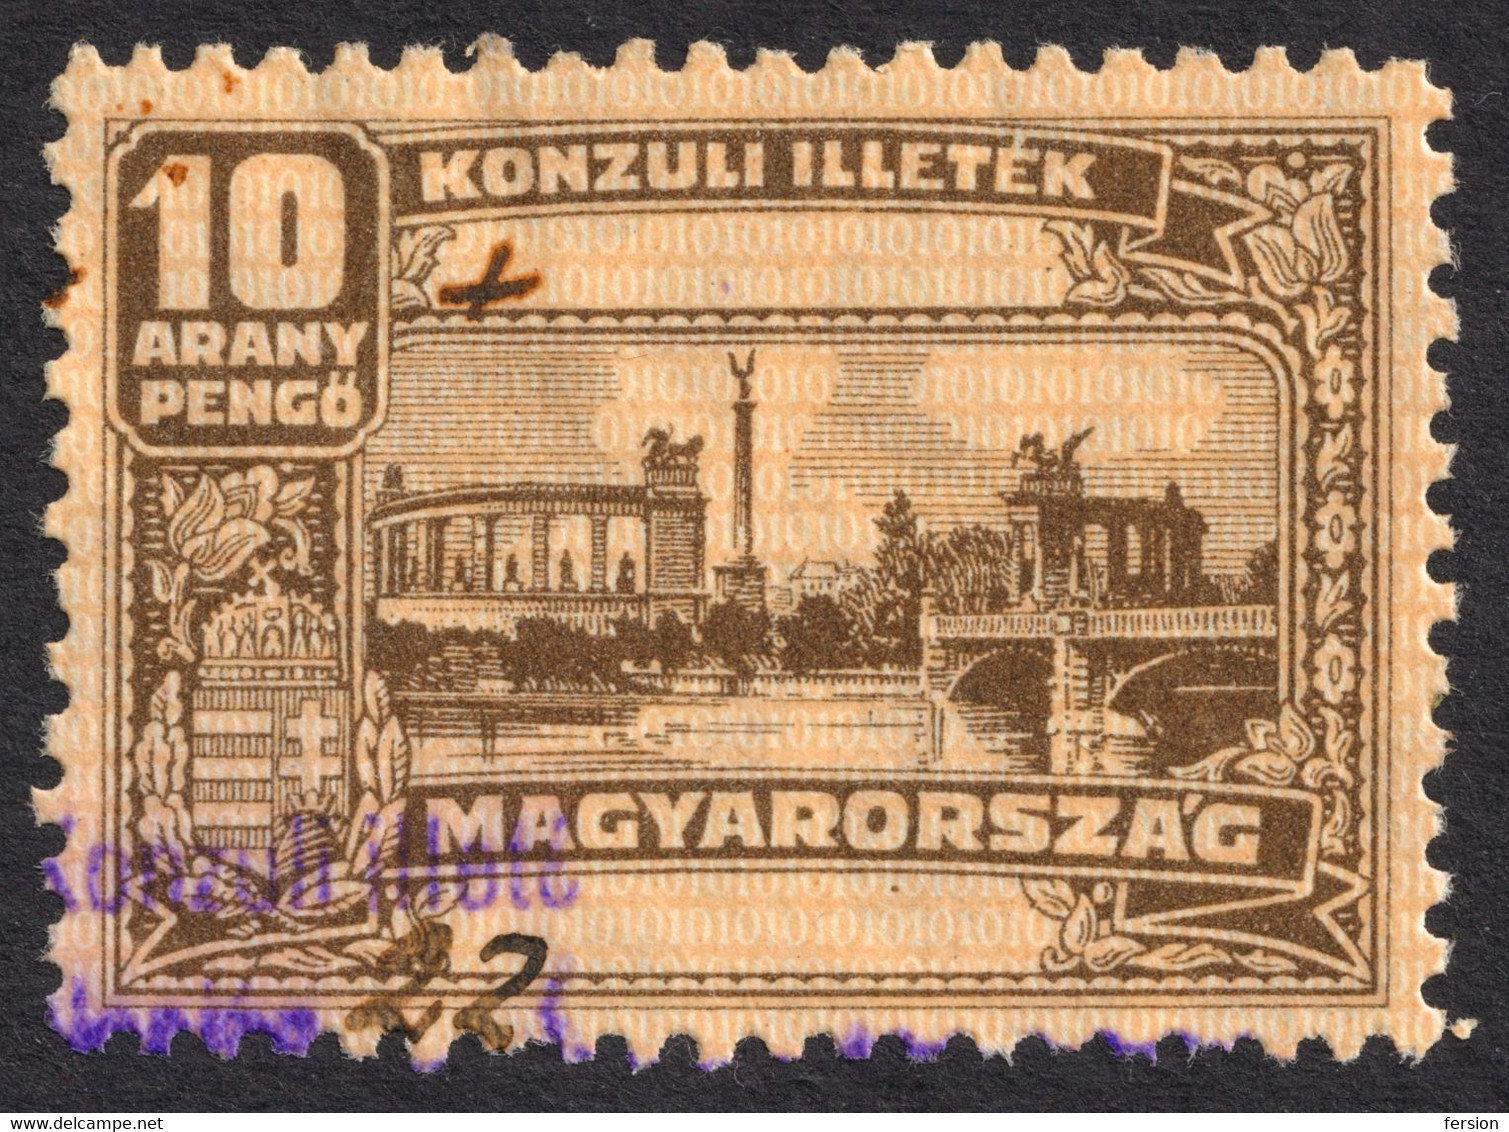 1931 - 1936 Hungary Ungarn Hongrie - Consular Revenue Tax Stamp - 10 A.P - Heroes' Square BUDAPEST Monument - Steuermarken